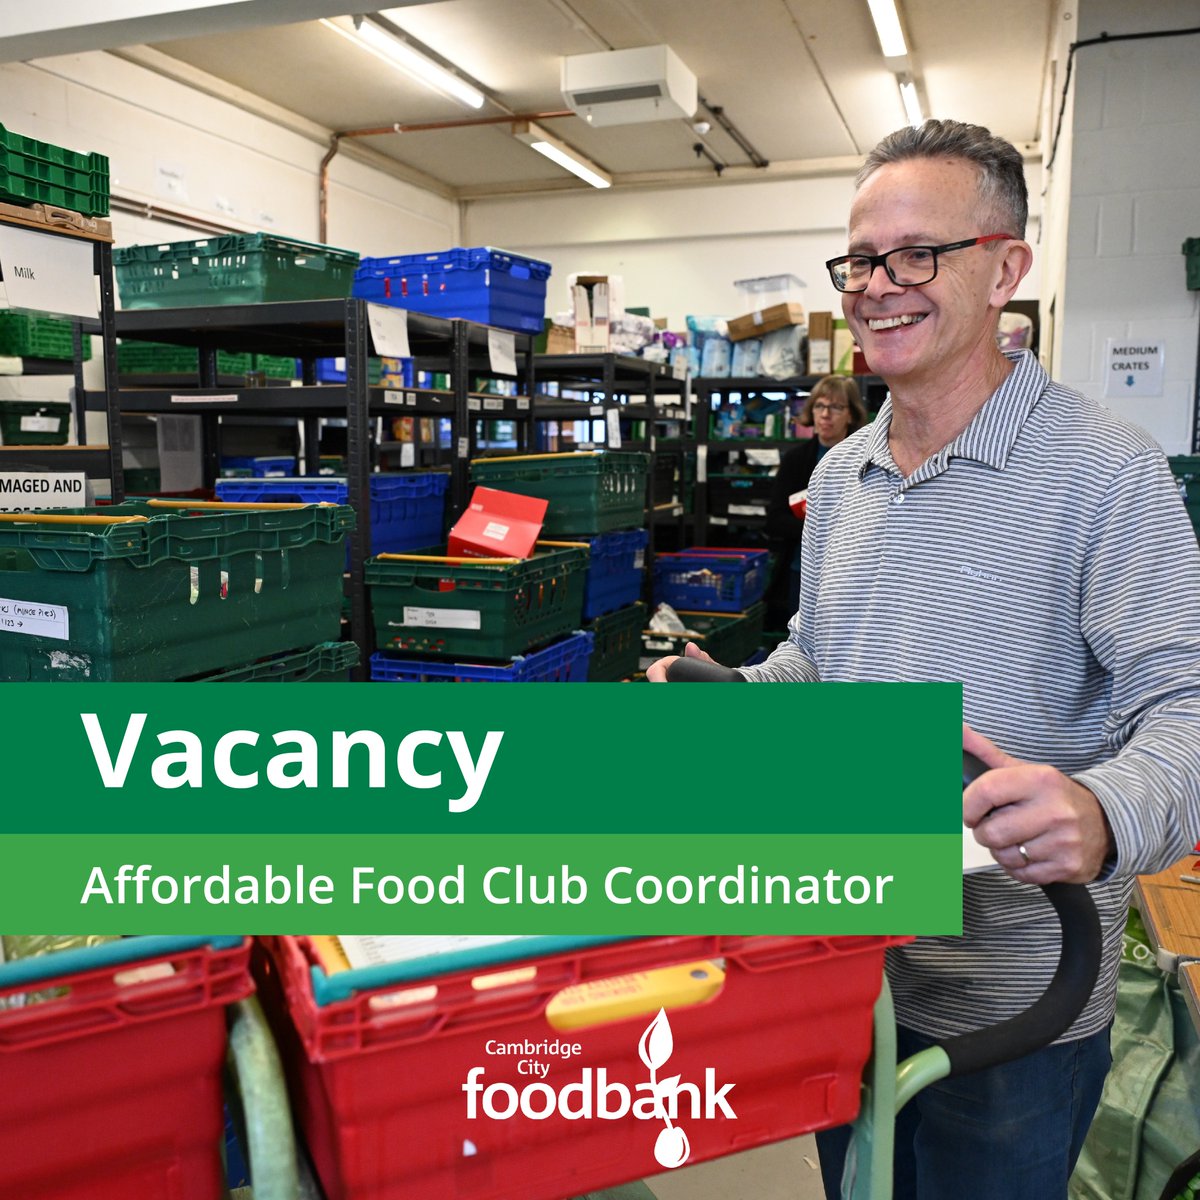 Want to work with the #community to fight against #FoodInsecurity? We have a job role for you! We’re looking to recruit a Food Club Coordinator to run a Food Hub in #Trumpington. Think you would make a good fit? Apply! Apply: cambridgecity.foodbank.org.uk/2024/03/14/cam… #Cambridge #Foodbank